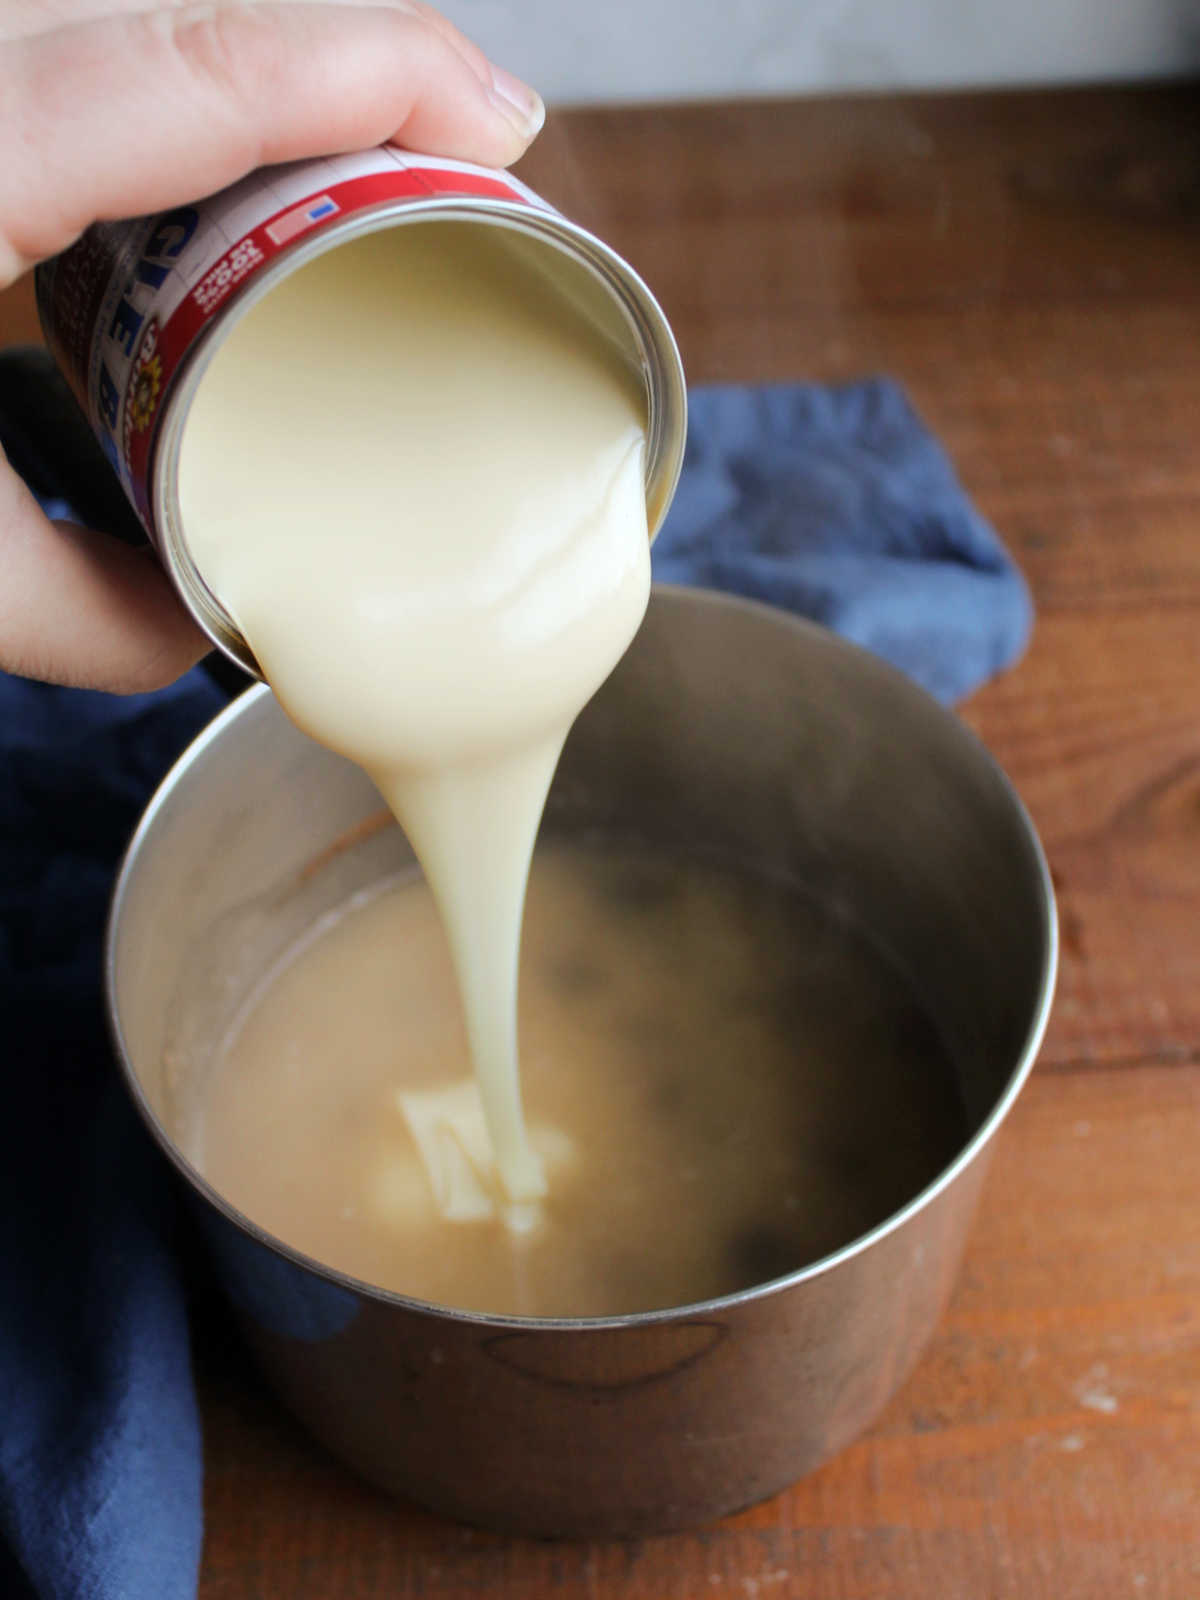 Adding a can of sweetened condensed milk to the rice mixture in the saucepan after the water has been brought to a boil.